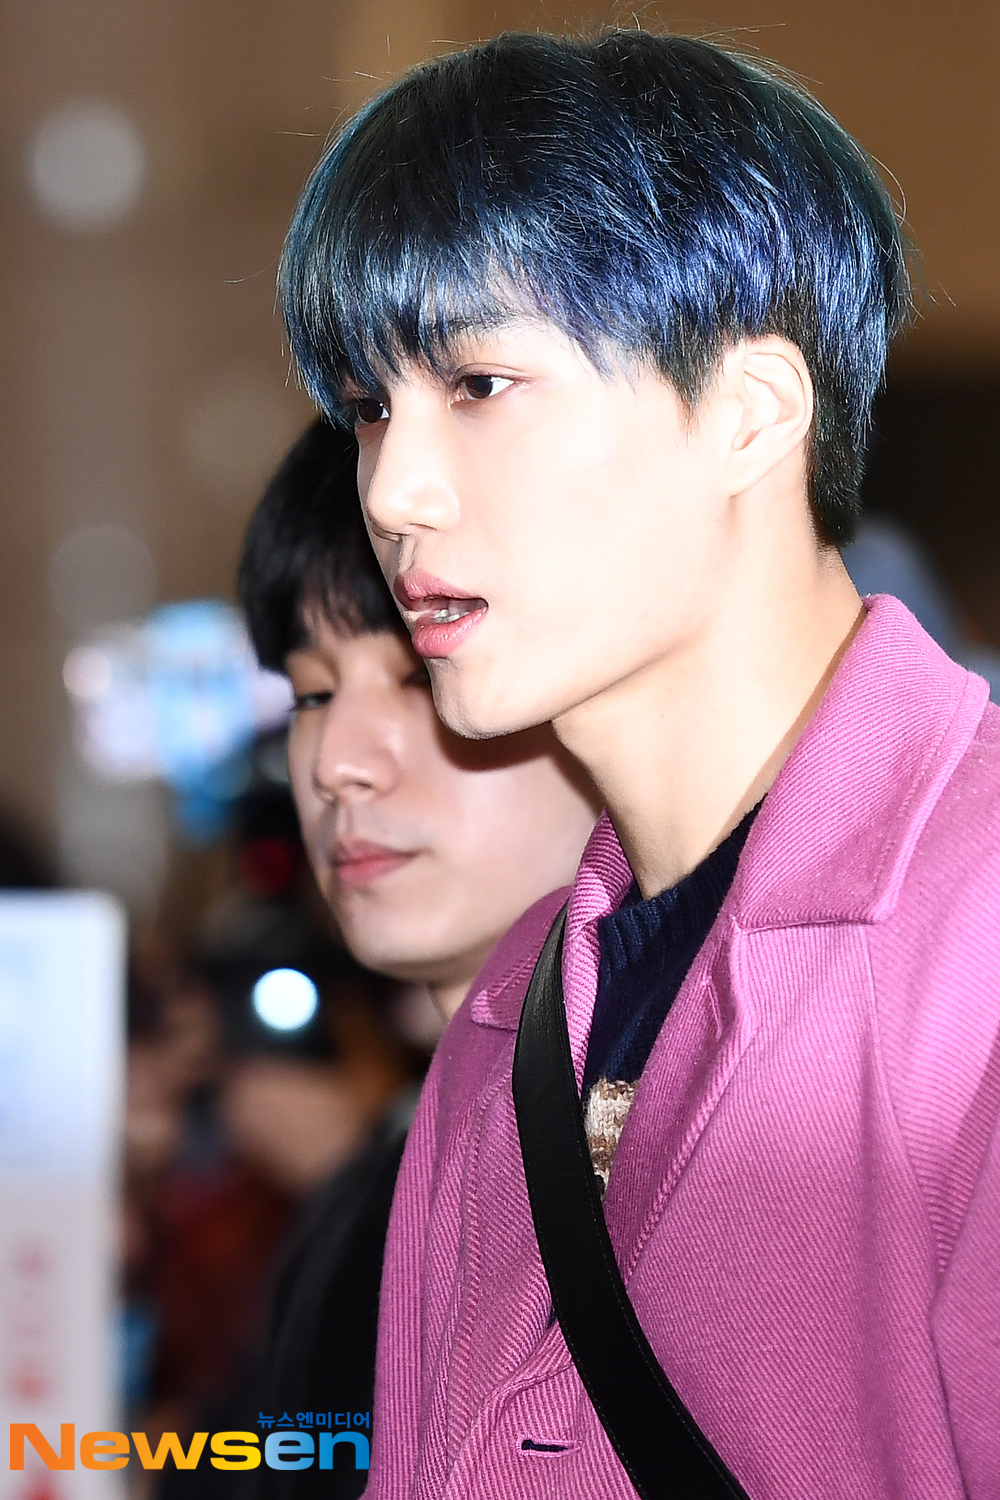 <p>EXO(EXO) member, guardian, Chanyeol, Kai, background, Sehun, Chen 10 November 17 Afternoon Seoul Gangseo way car Gimpo International Airport through the ‘EXO PLANET #5 - EXplOration - In Japan’ schedule to attend car Japan Osaka University the country had.</p><p>EXO(EXO) member, Kai with Japan Osaka University the country has.</p>